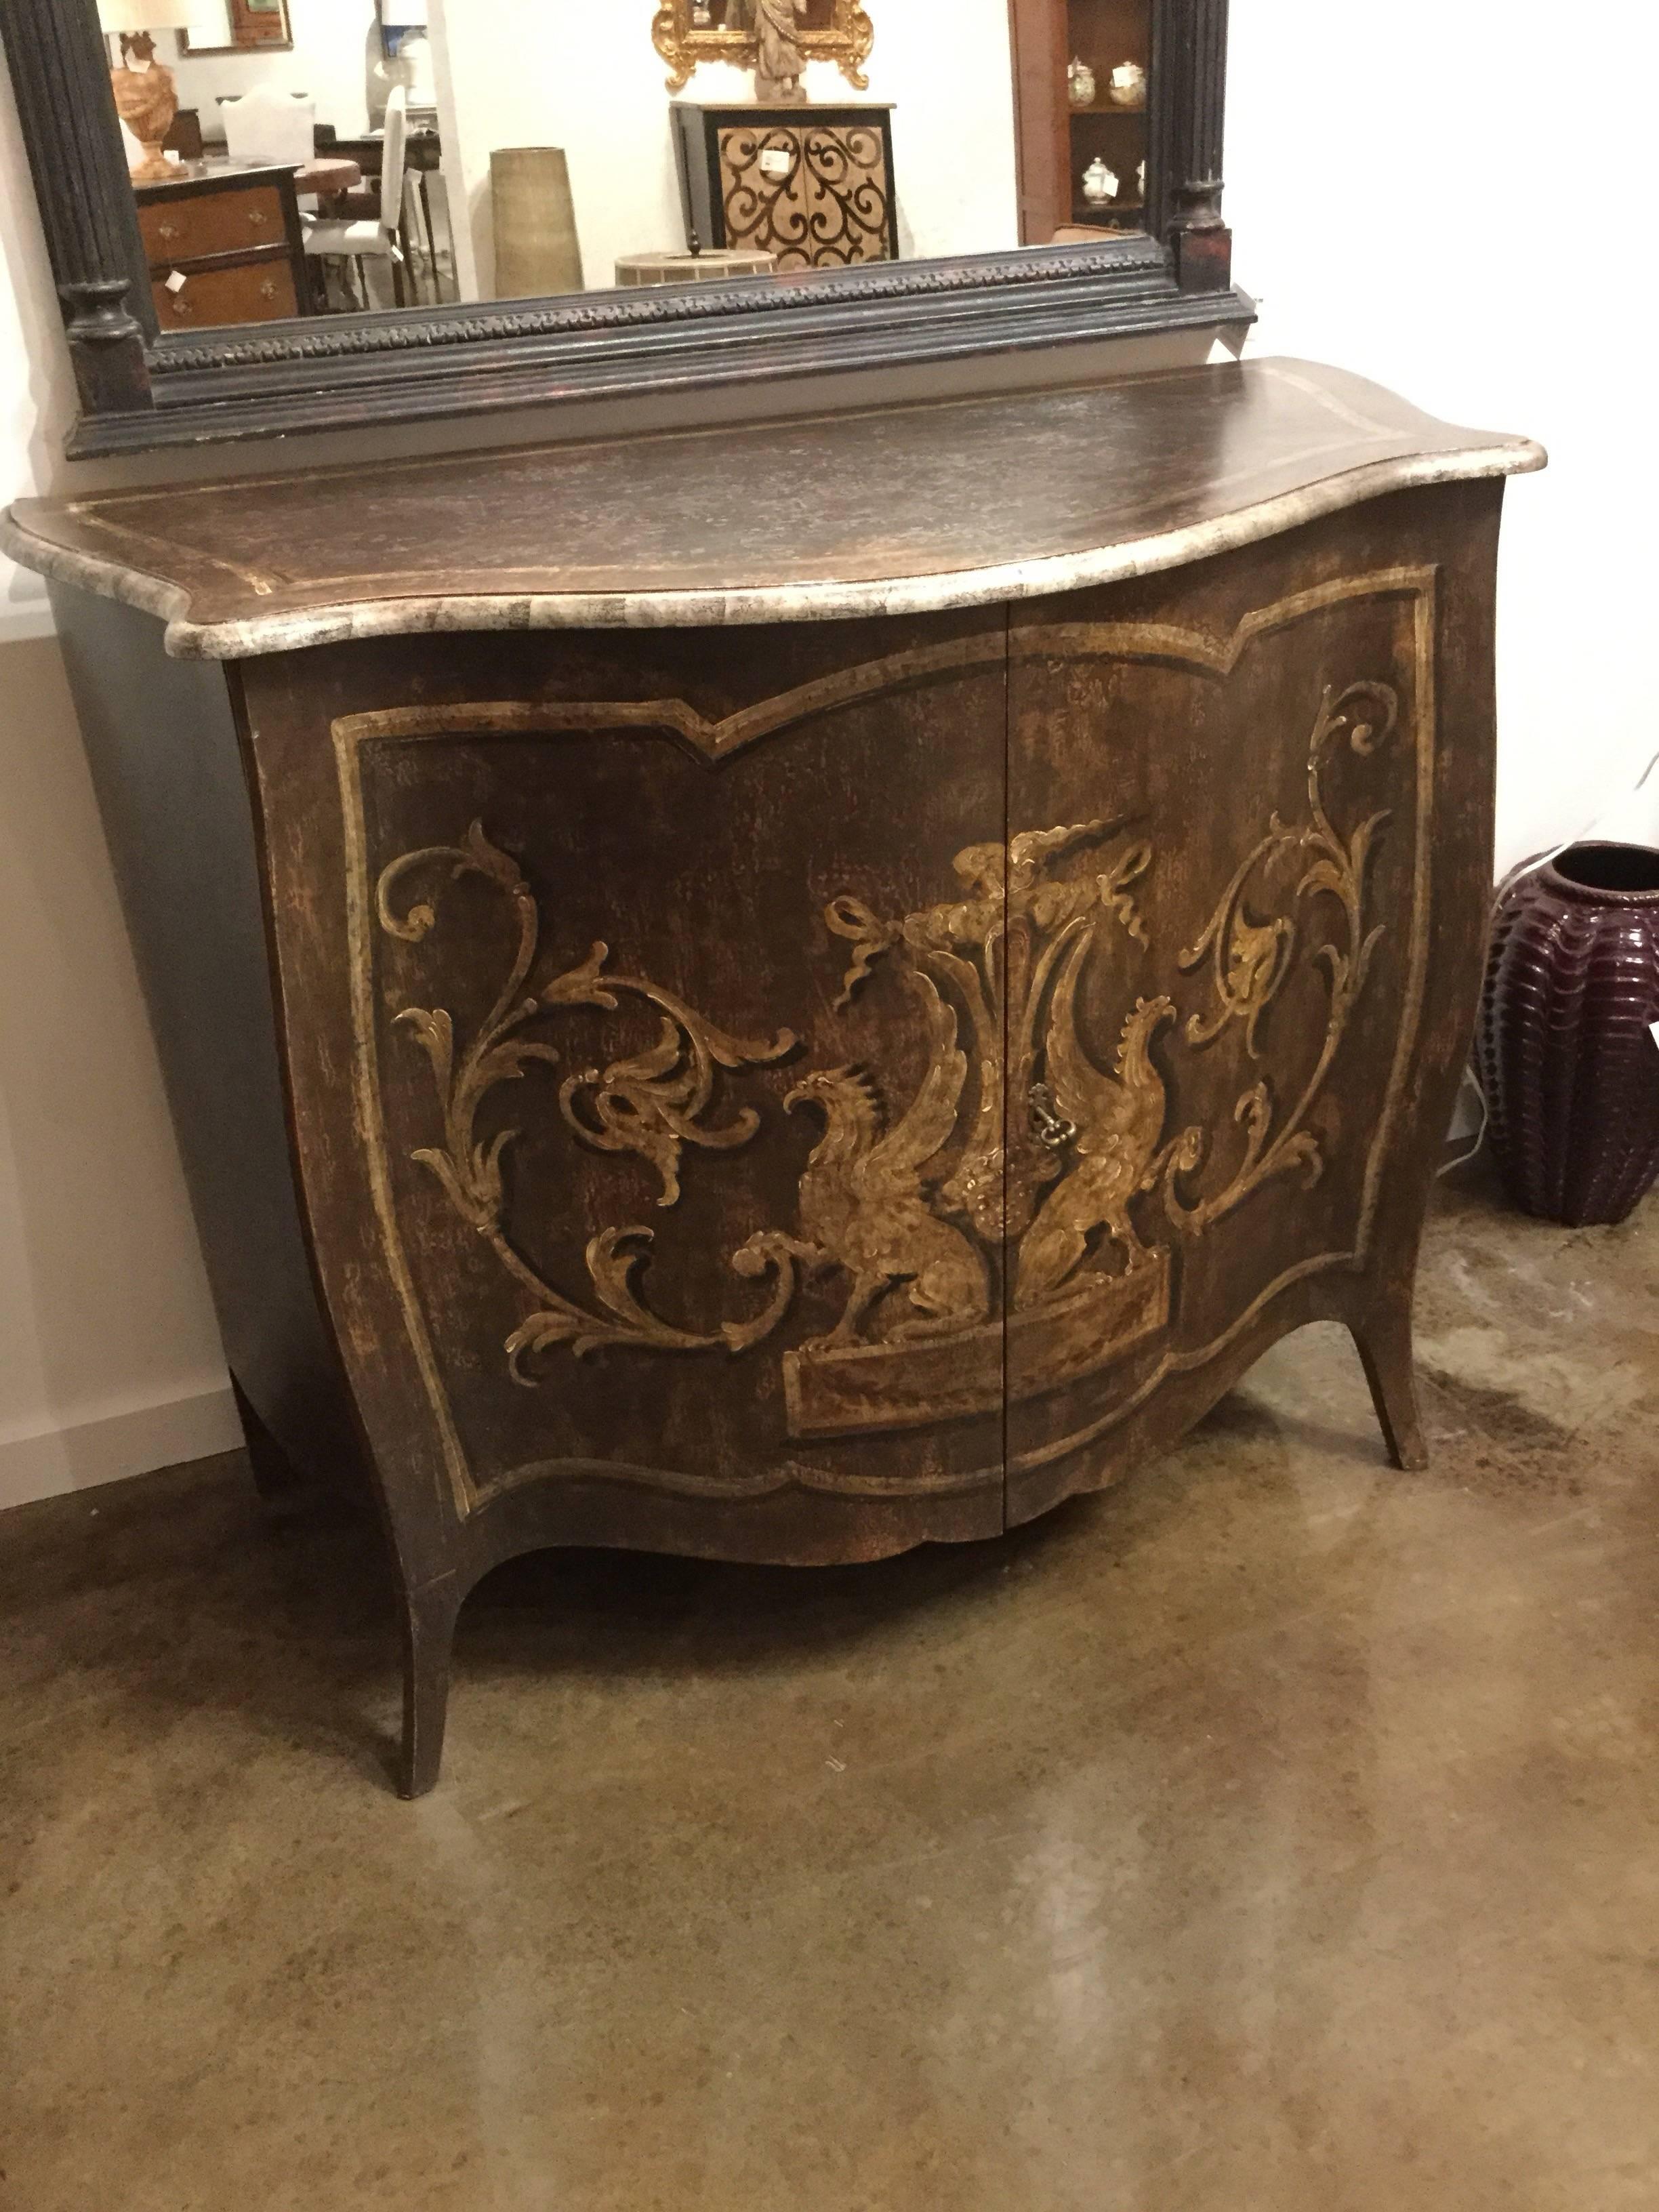 Hand-painted, two-door chest in an aged dark walnut color featuring griffons and scrolled vines on the bowed front in shades of ivory and gold, Italy.